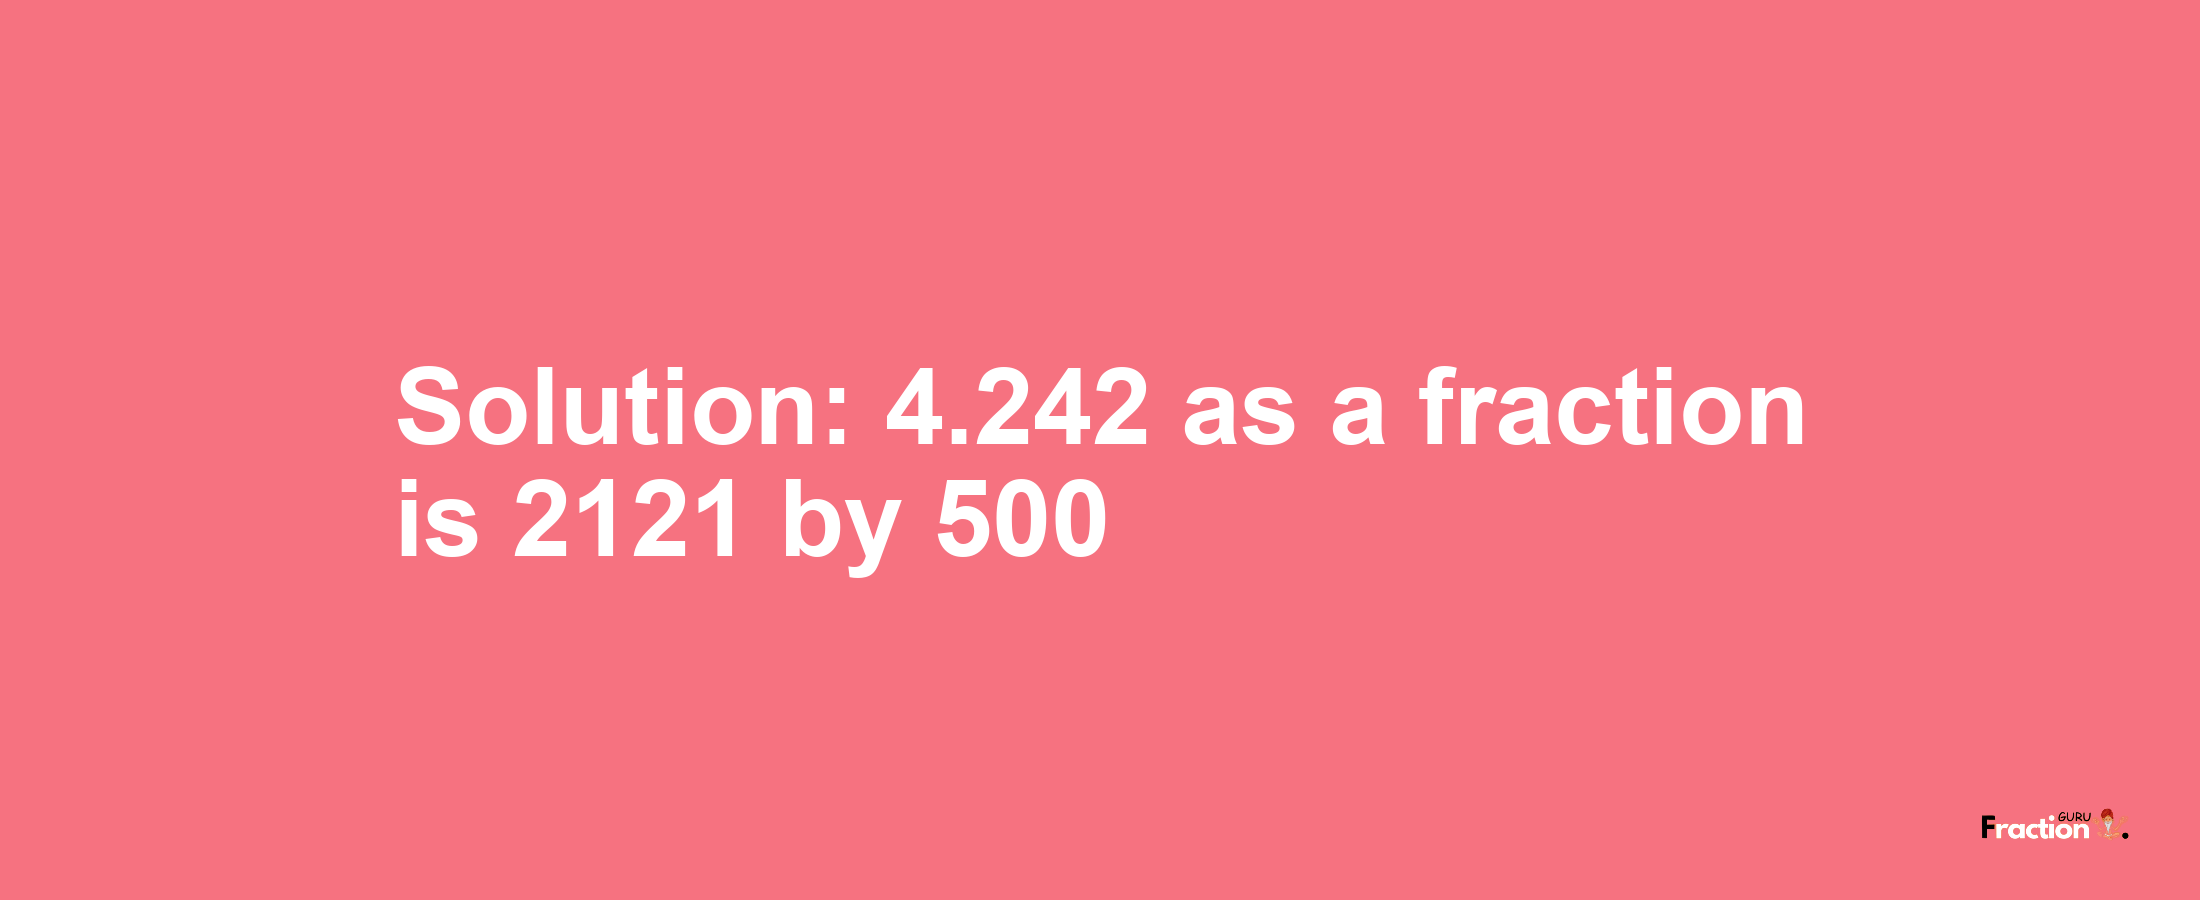 Solution:4.242 as a fraction is 2121/500